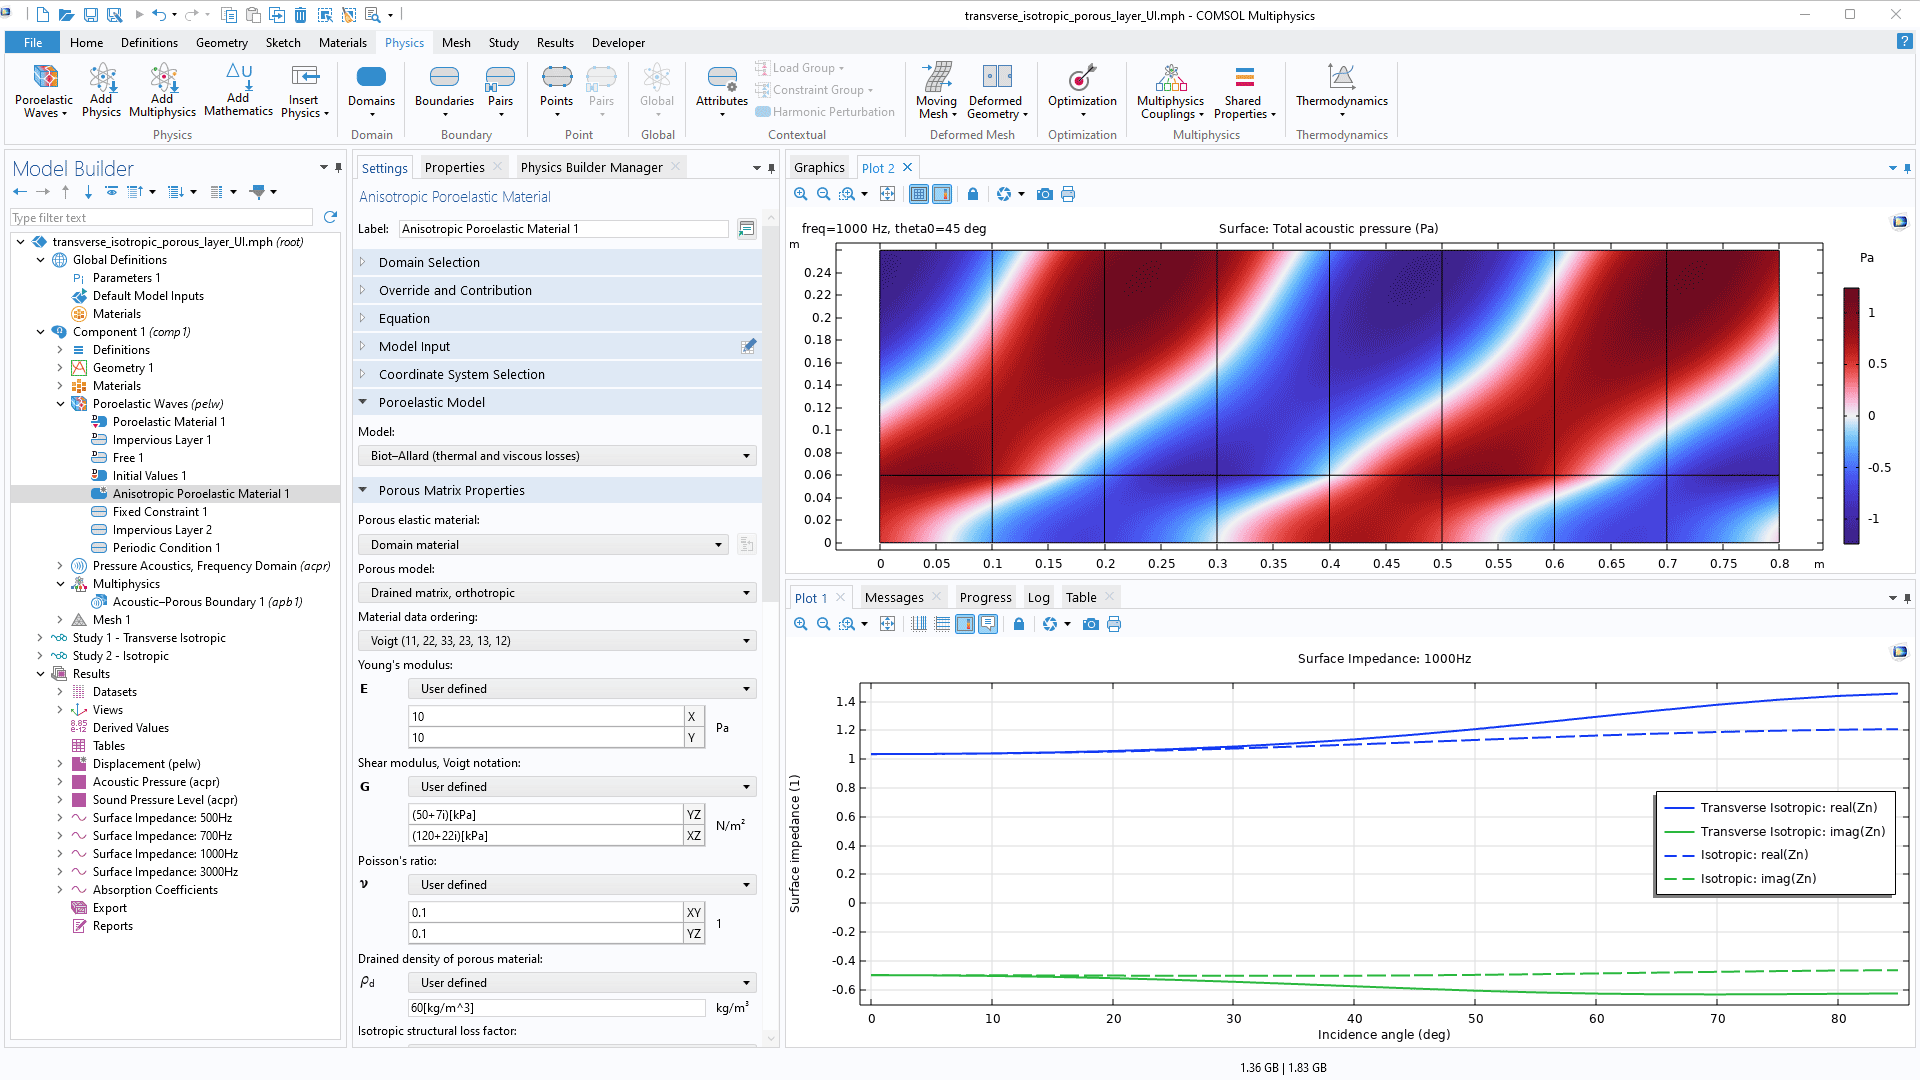 The COMSOL Multiphysics UI showing the Model Builder with the Anisotropic Poroelastic Material node highlighted, the corresponding Settings window, a 1D Impedance plot, and a 2D total acoustic pressure plot in the Graphics window.